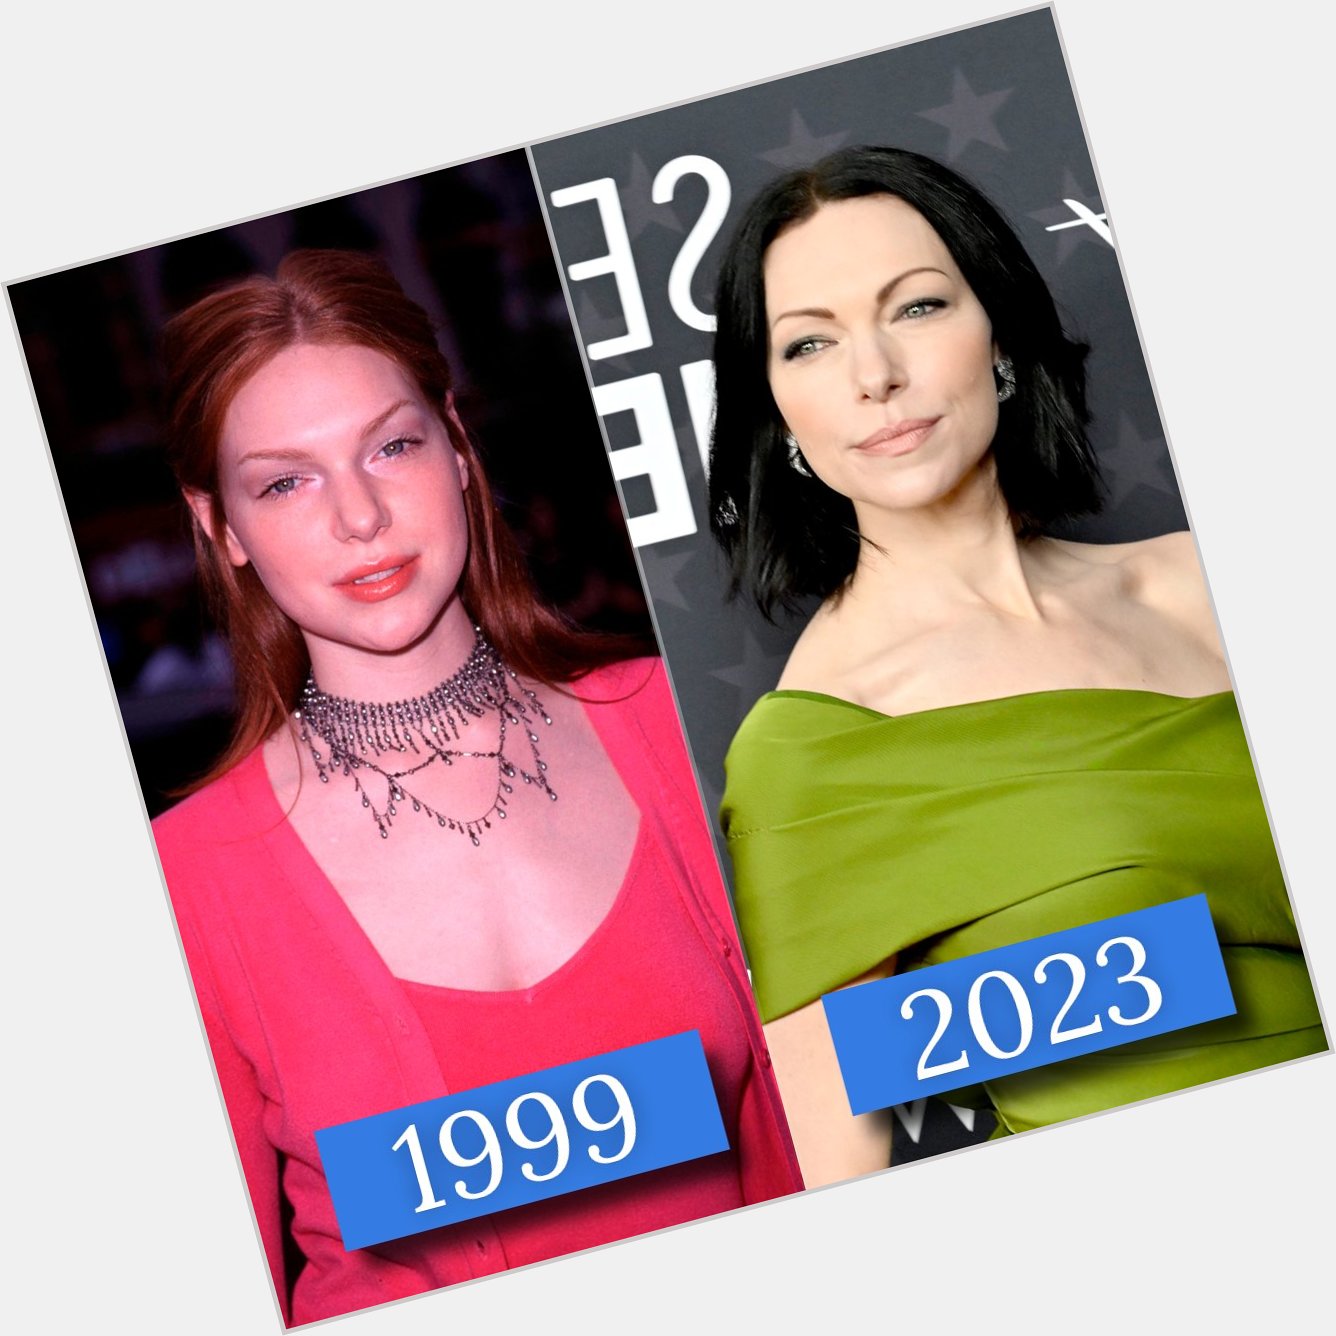 Beautiful as ever, happy birthday to Laura Prepon! 